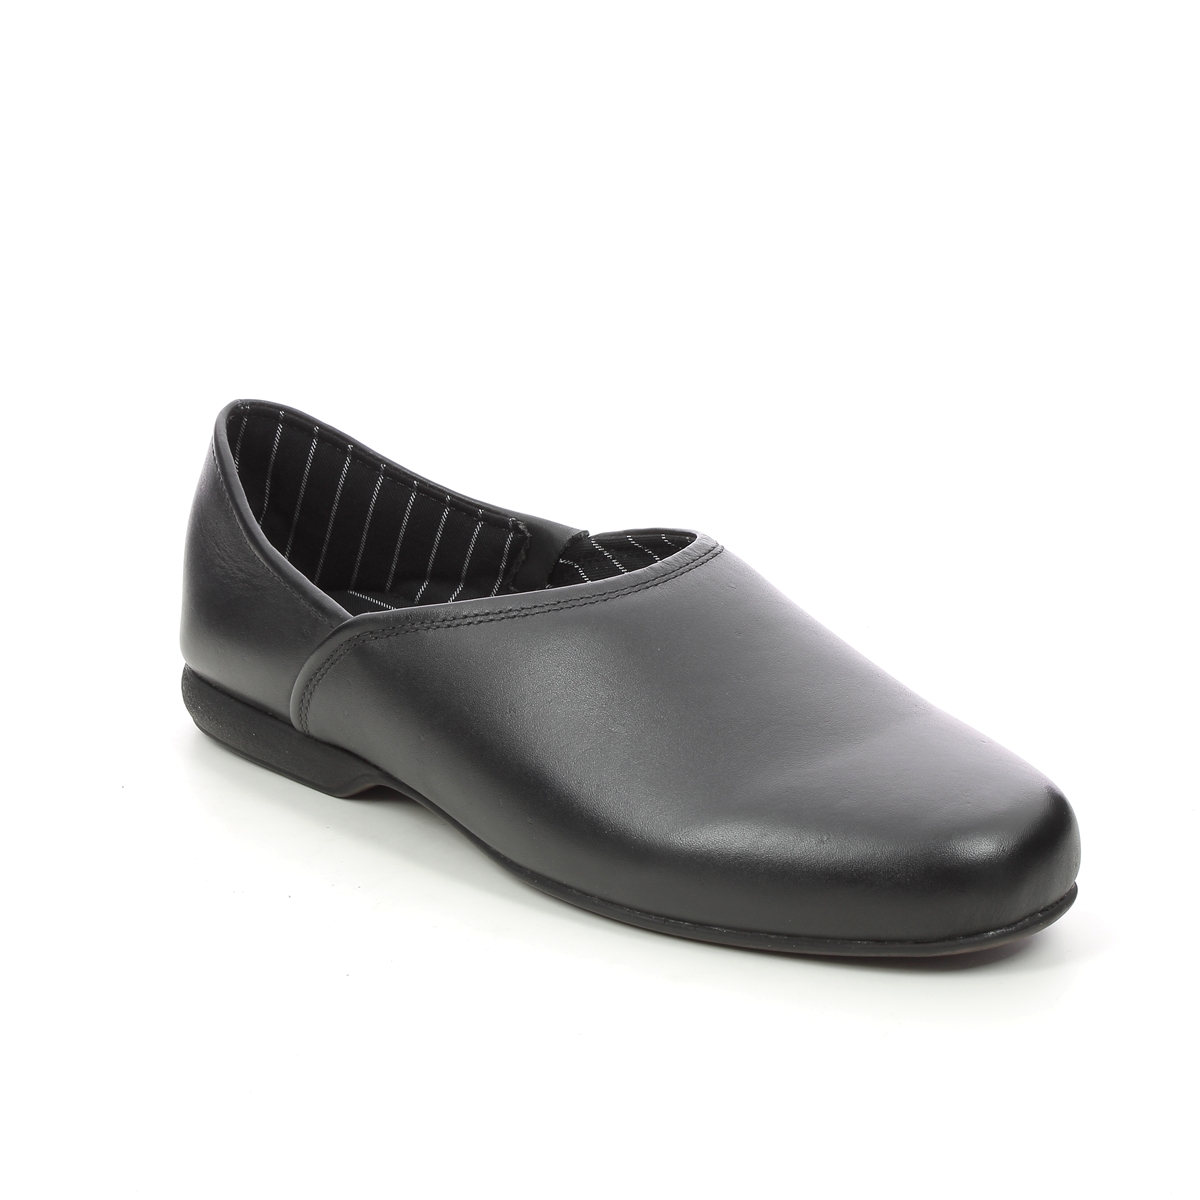 Clarks Harston Elite Black Leather Mens Slippers 447207G In Size 11 In Plain Black Leather G Width Fitting